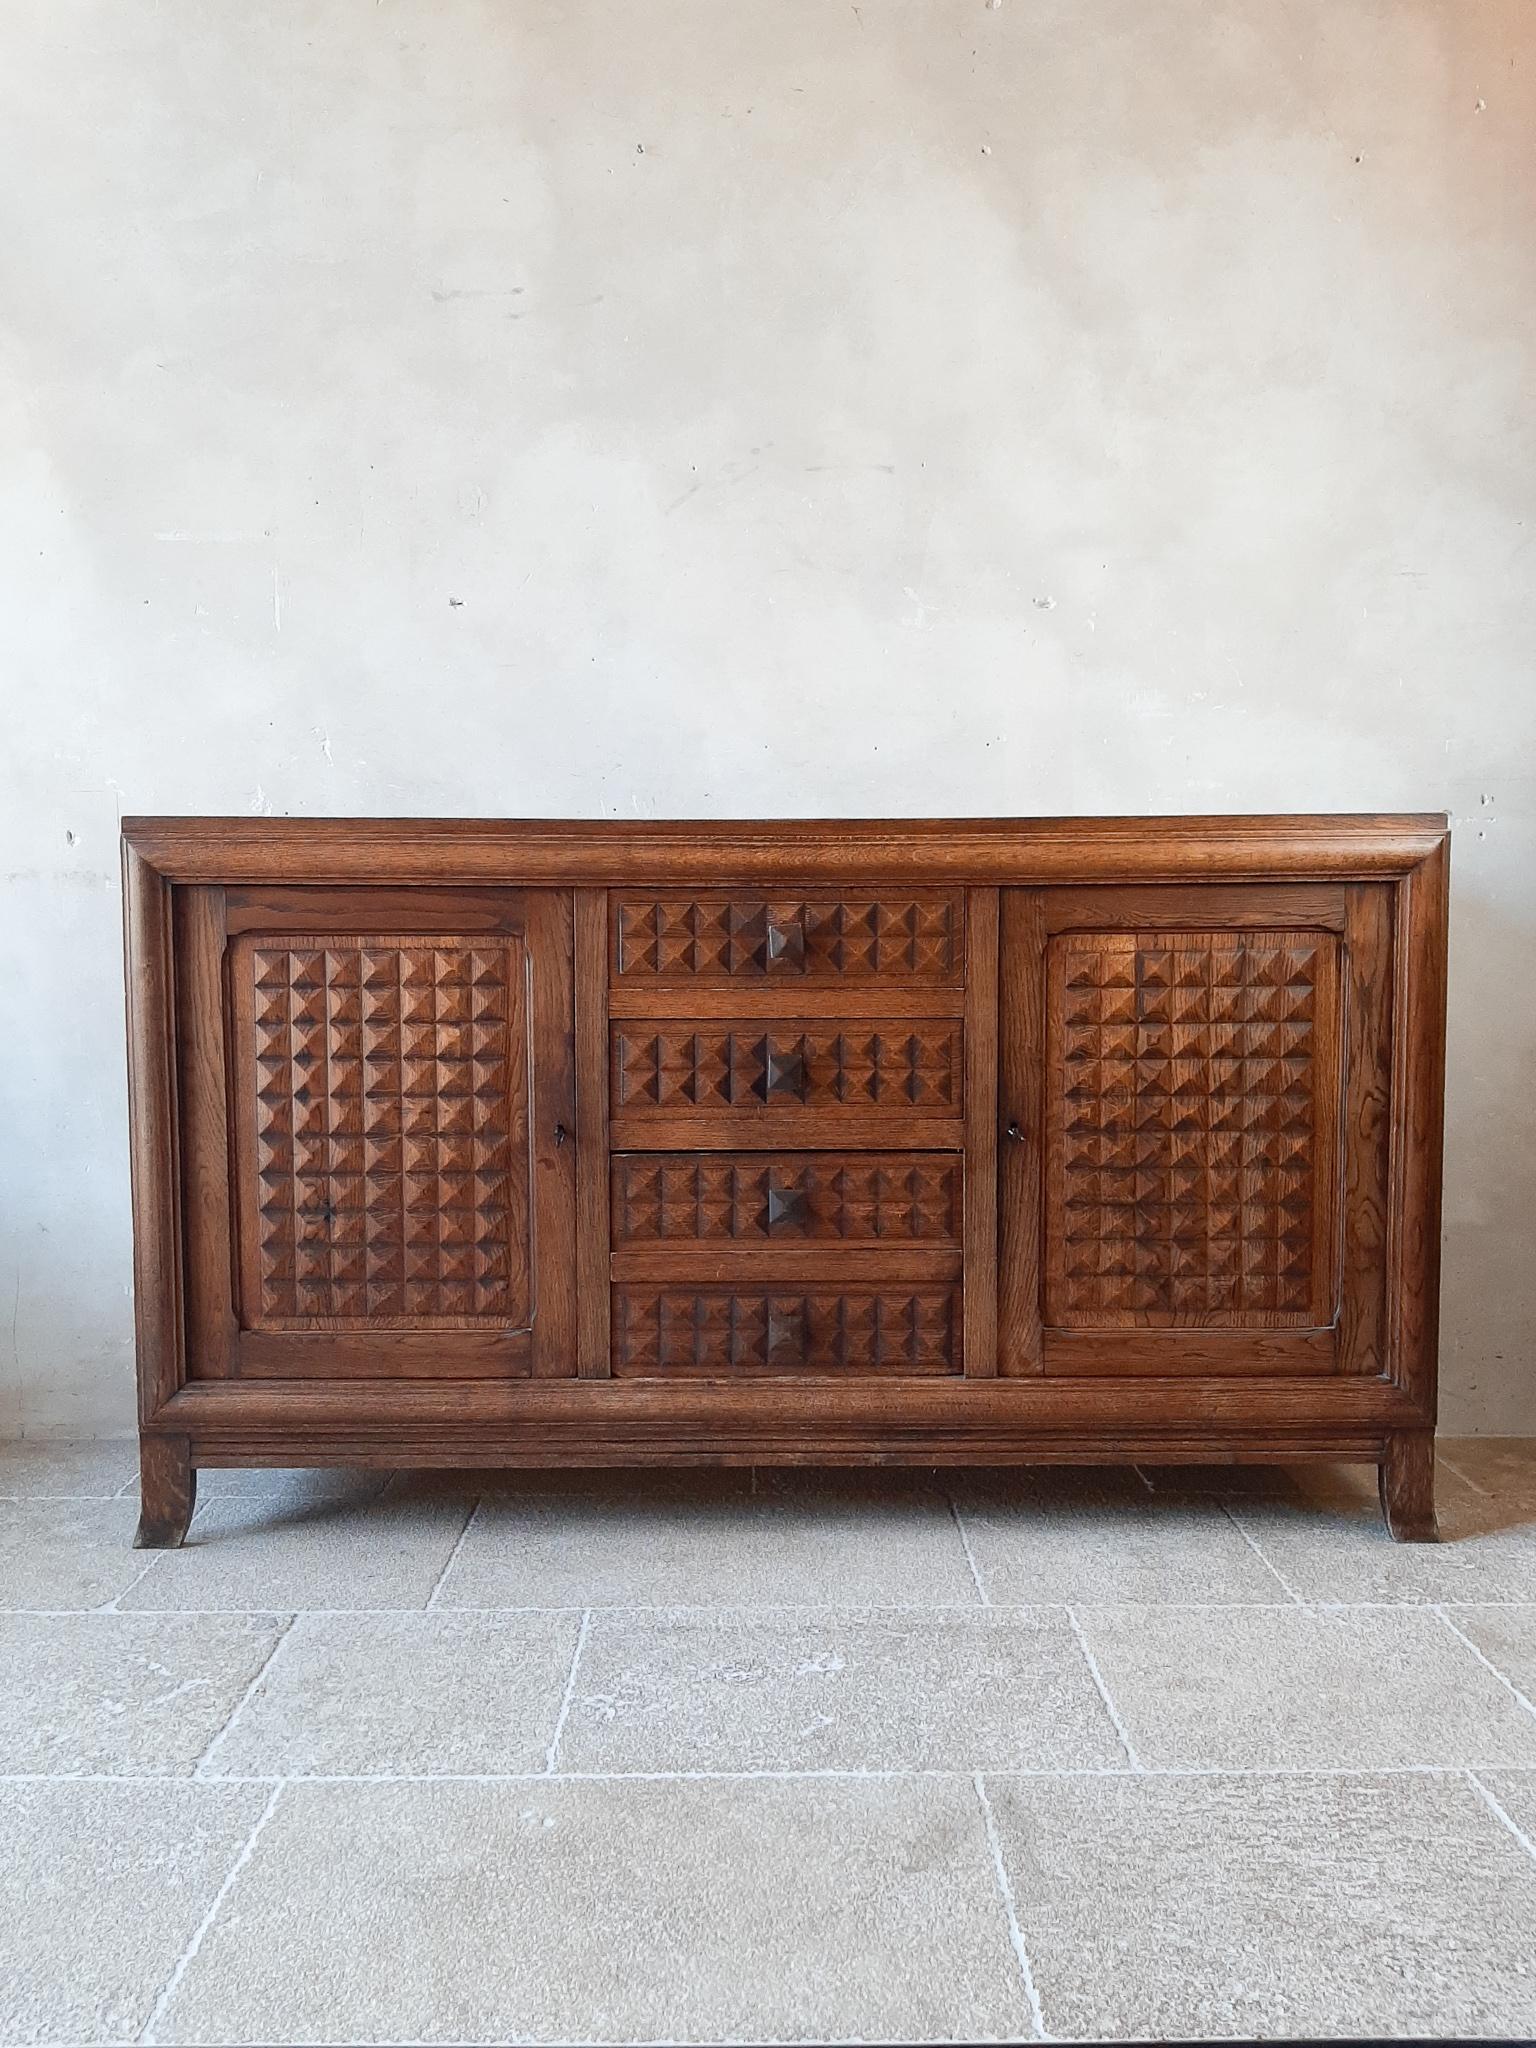 Midcentury vintage sideboard, credenza by Charles Dudouyt in brown oak with a French polish finish, 1940s-1950s. The cabinet features 2 large doors on each side, in the middle 2 drawers above a small door that looks like the bottom two drawers. The